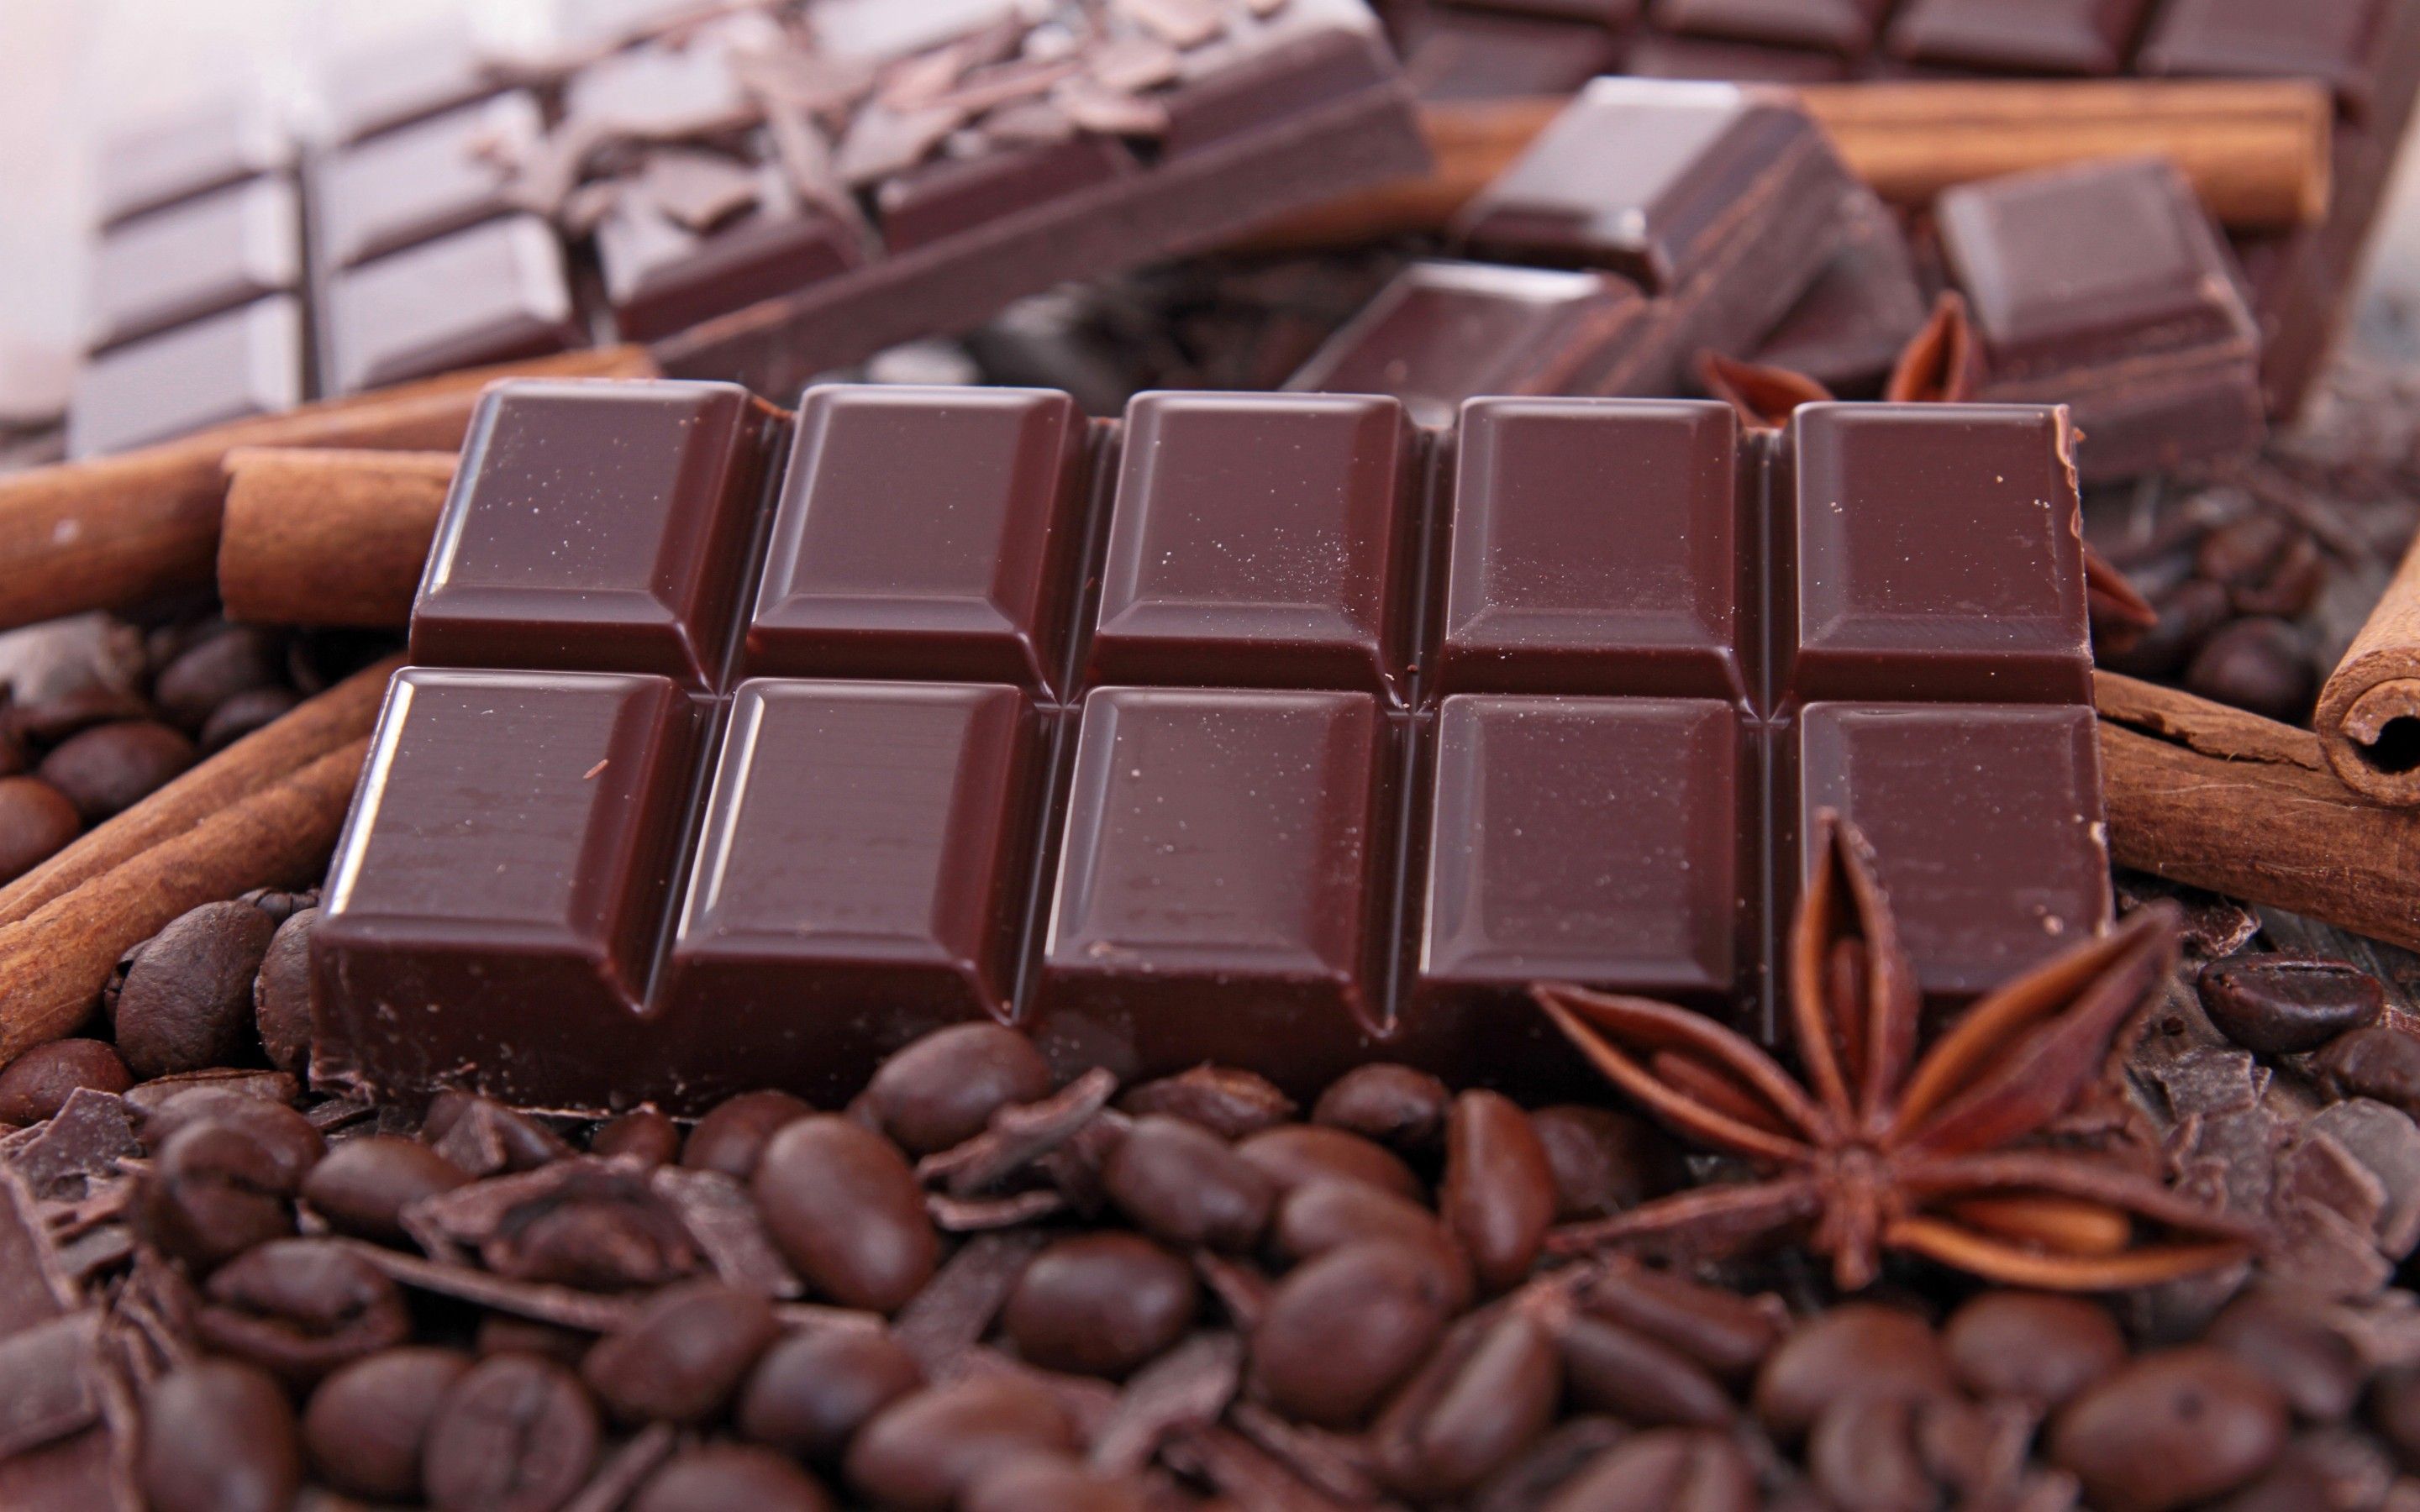 296 Chocolate Hd Wallpapers - Good Morning With Chocolate - HD Wallpaper 